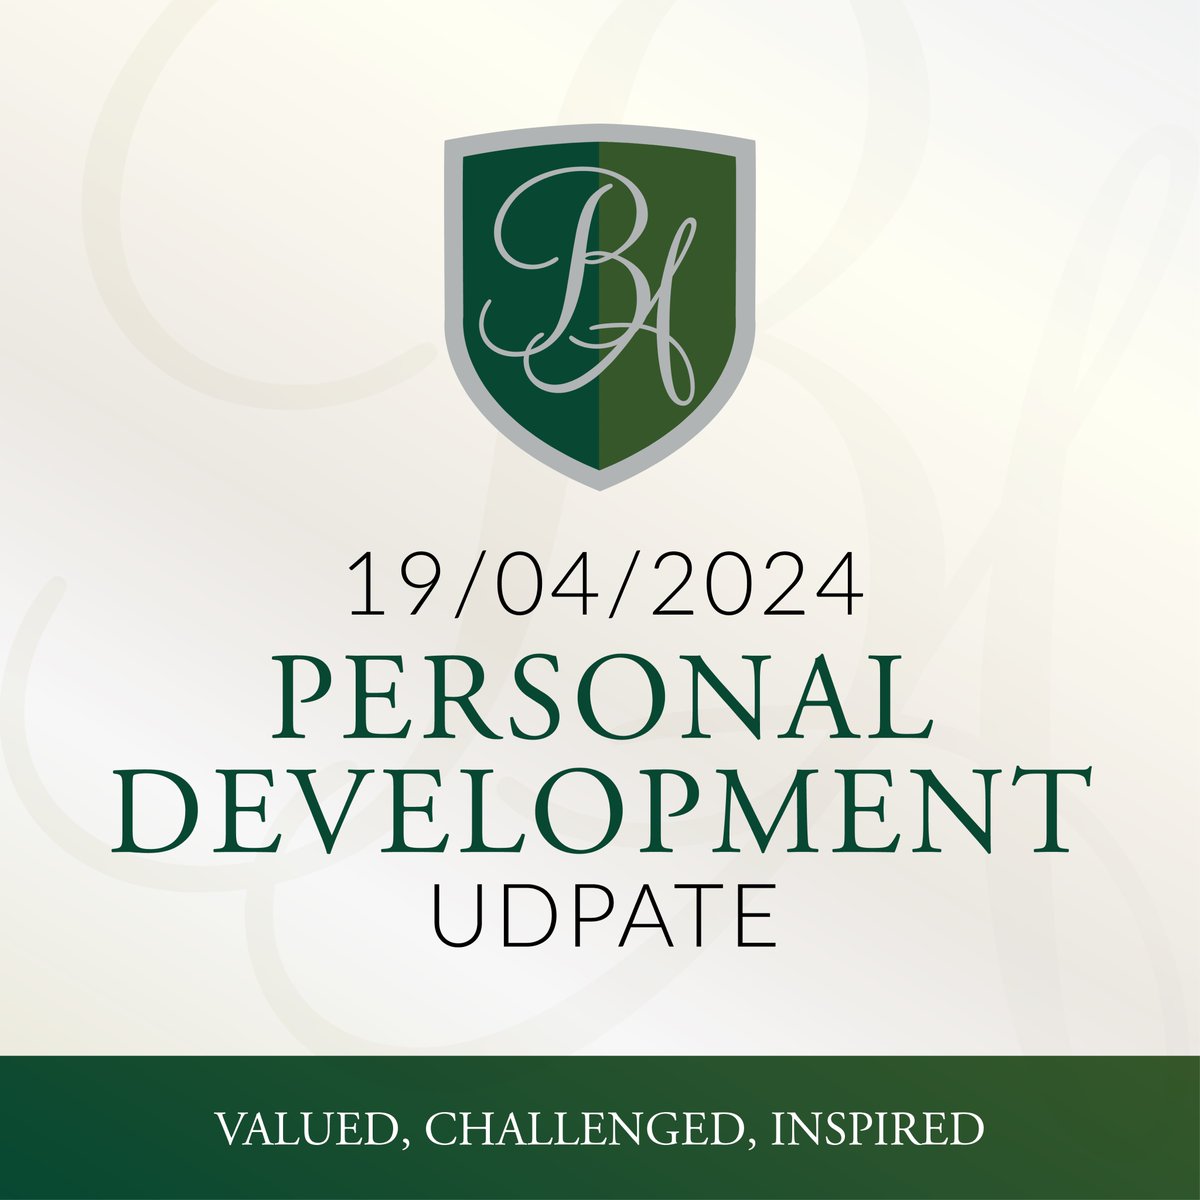 Click the link below to view our Personal Development update for 19/04/2024. bedeacademy.org.uk/personal-devel… #ESFmat #BedeAcademy #Valued #Challenged #Inspired